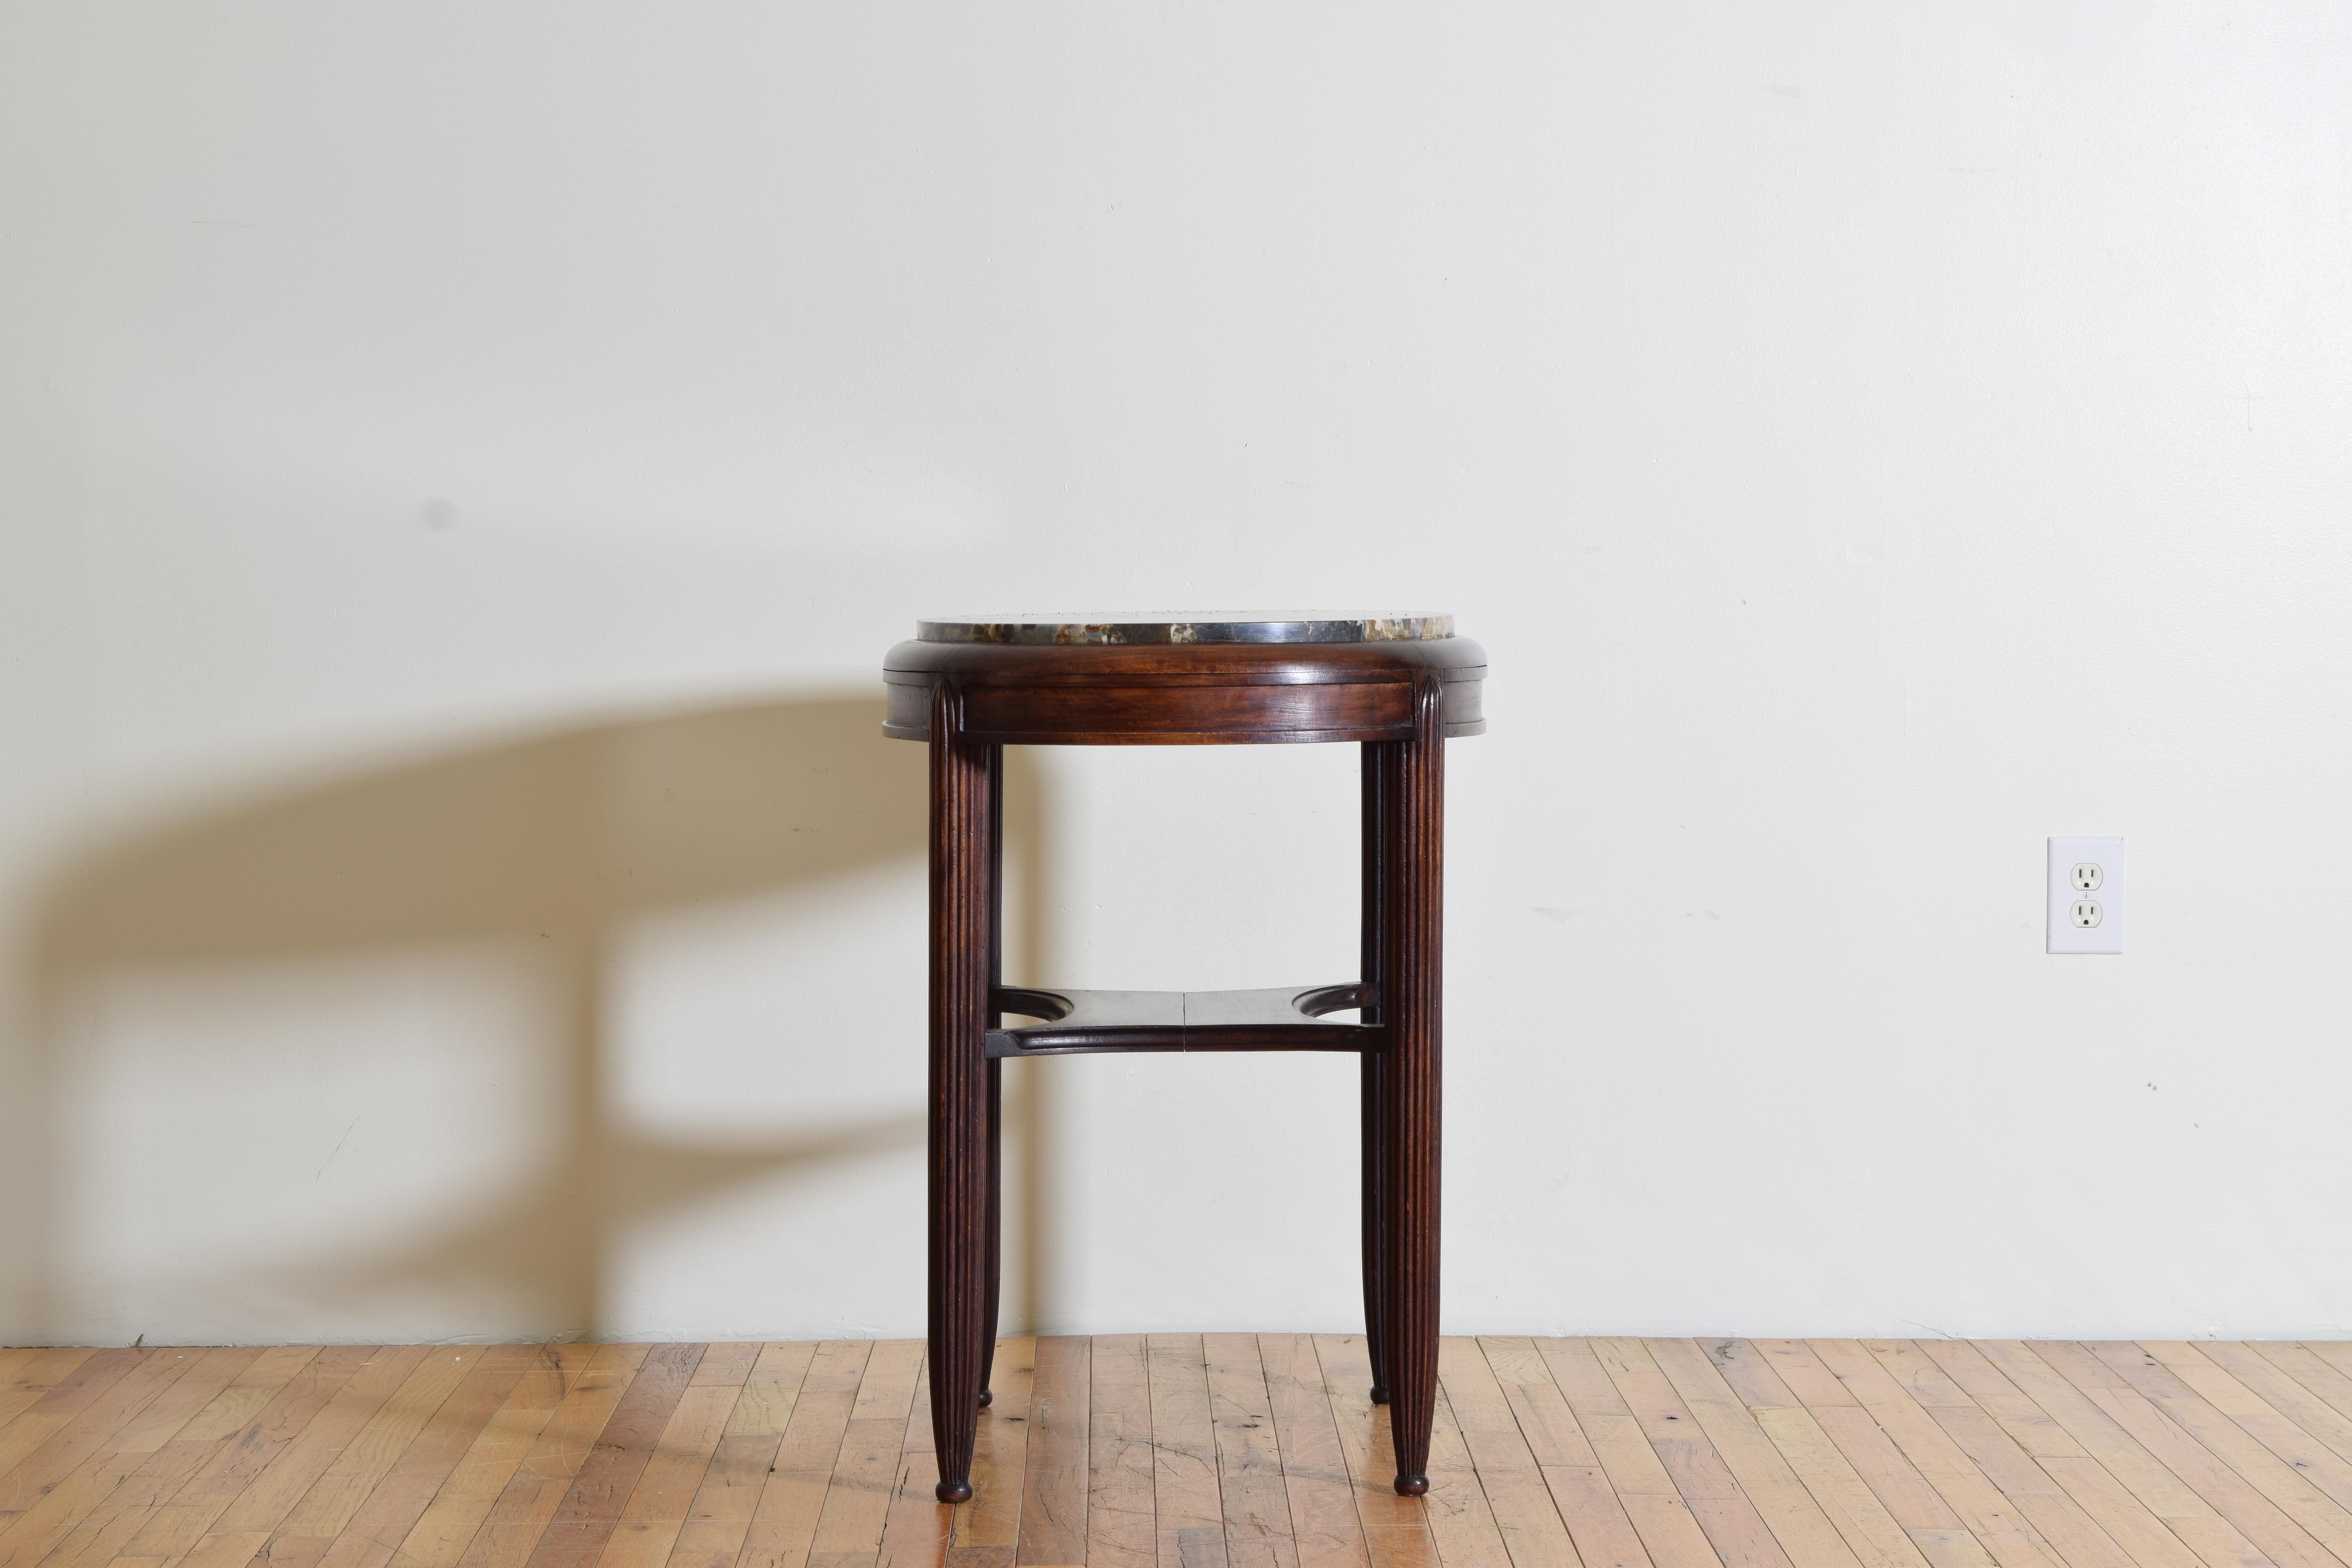 20th Century French Art Deco Period Mahogany and Marble-Top Table, circa 1920-1930